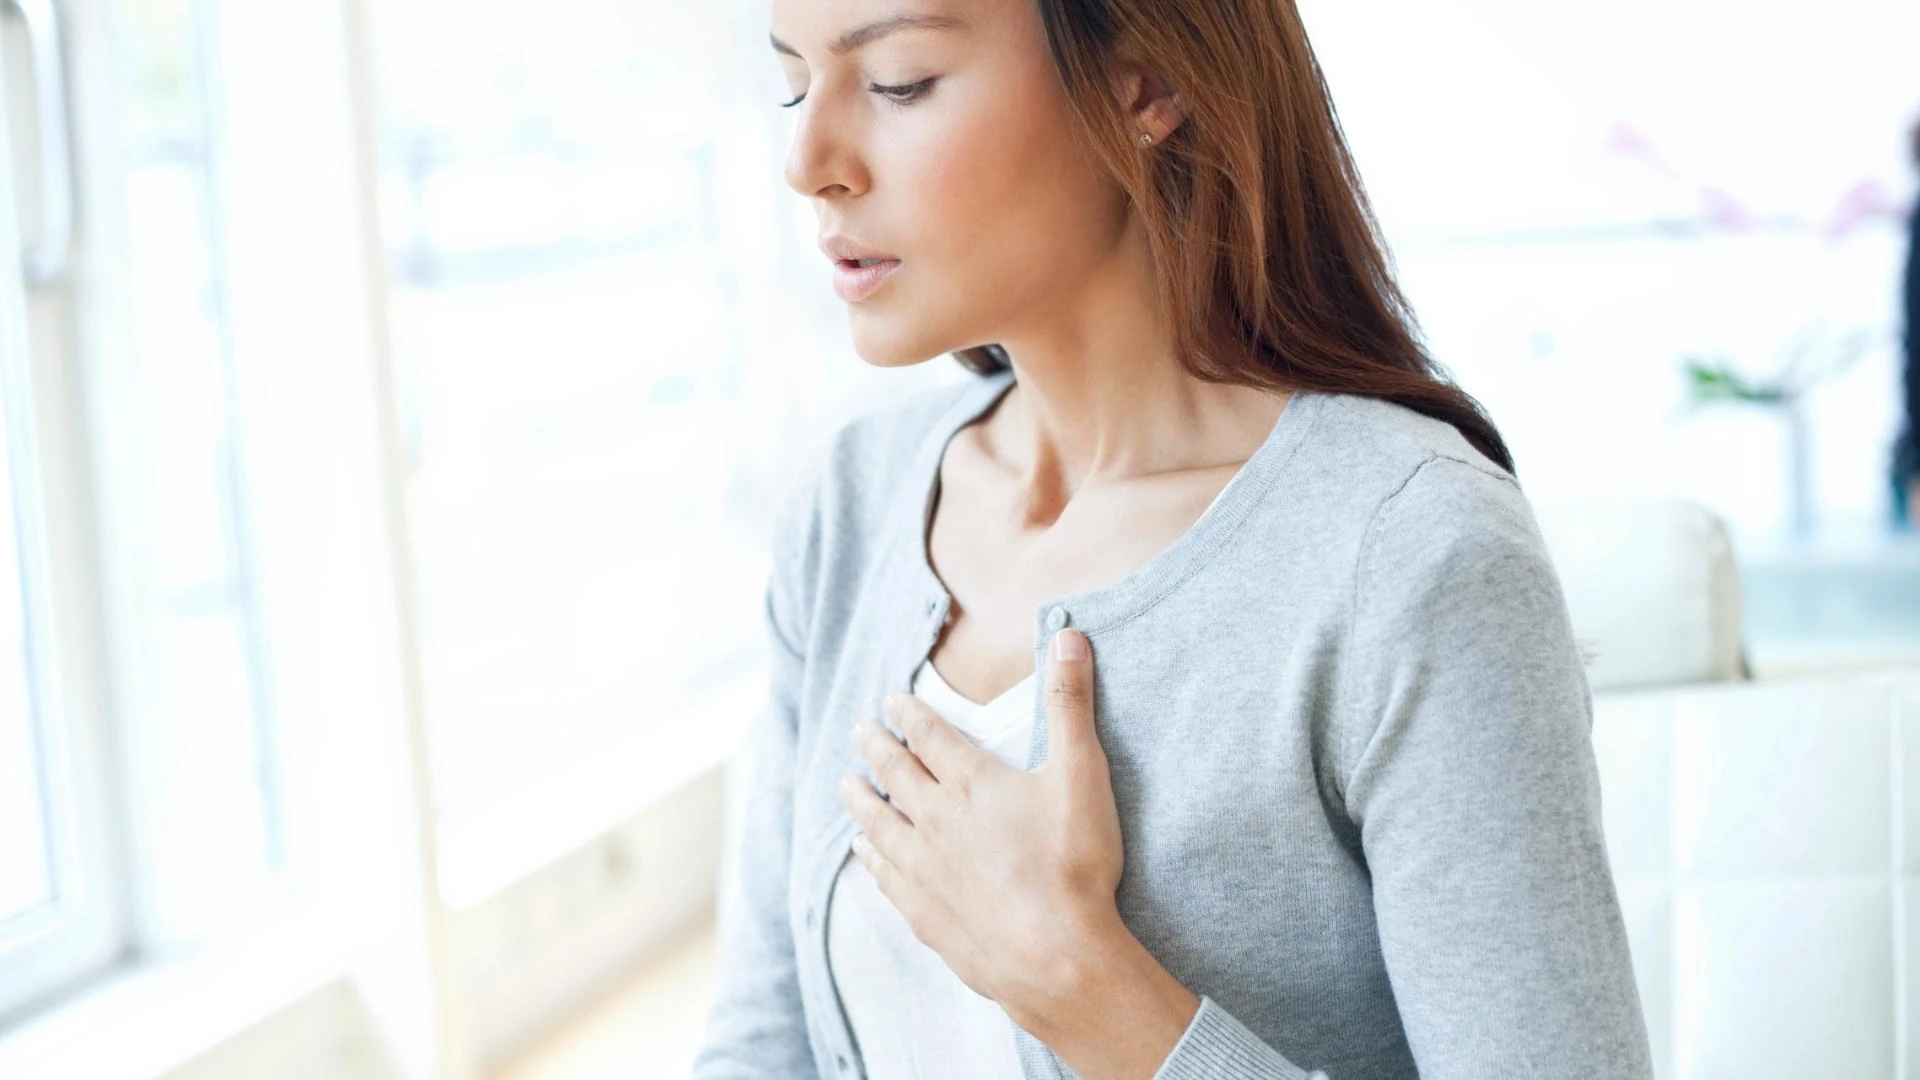 How Does Shortness of Breath Occur During Panic Attack?